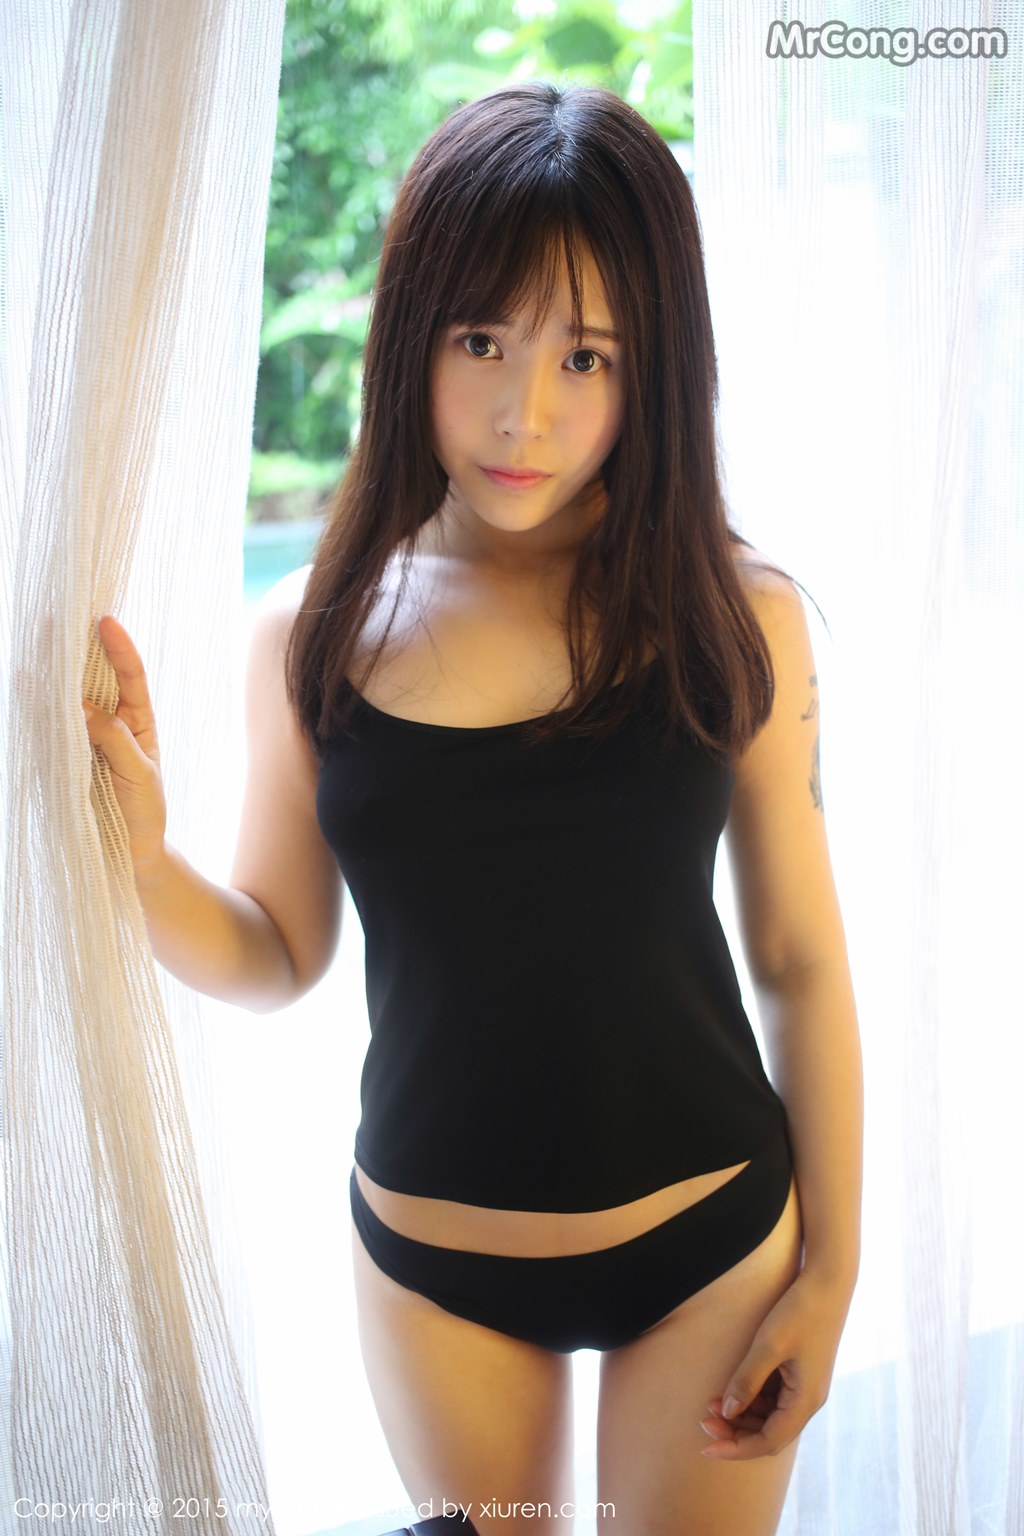 MyGirl Vol.173: Model Evelyn (艾莉) (94 pictures) photo 3-6